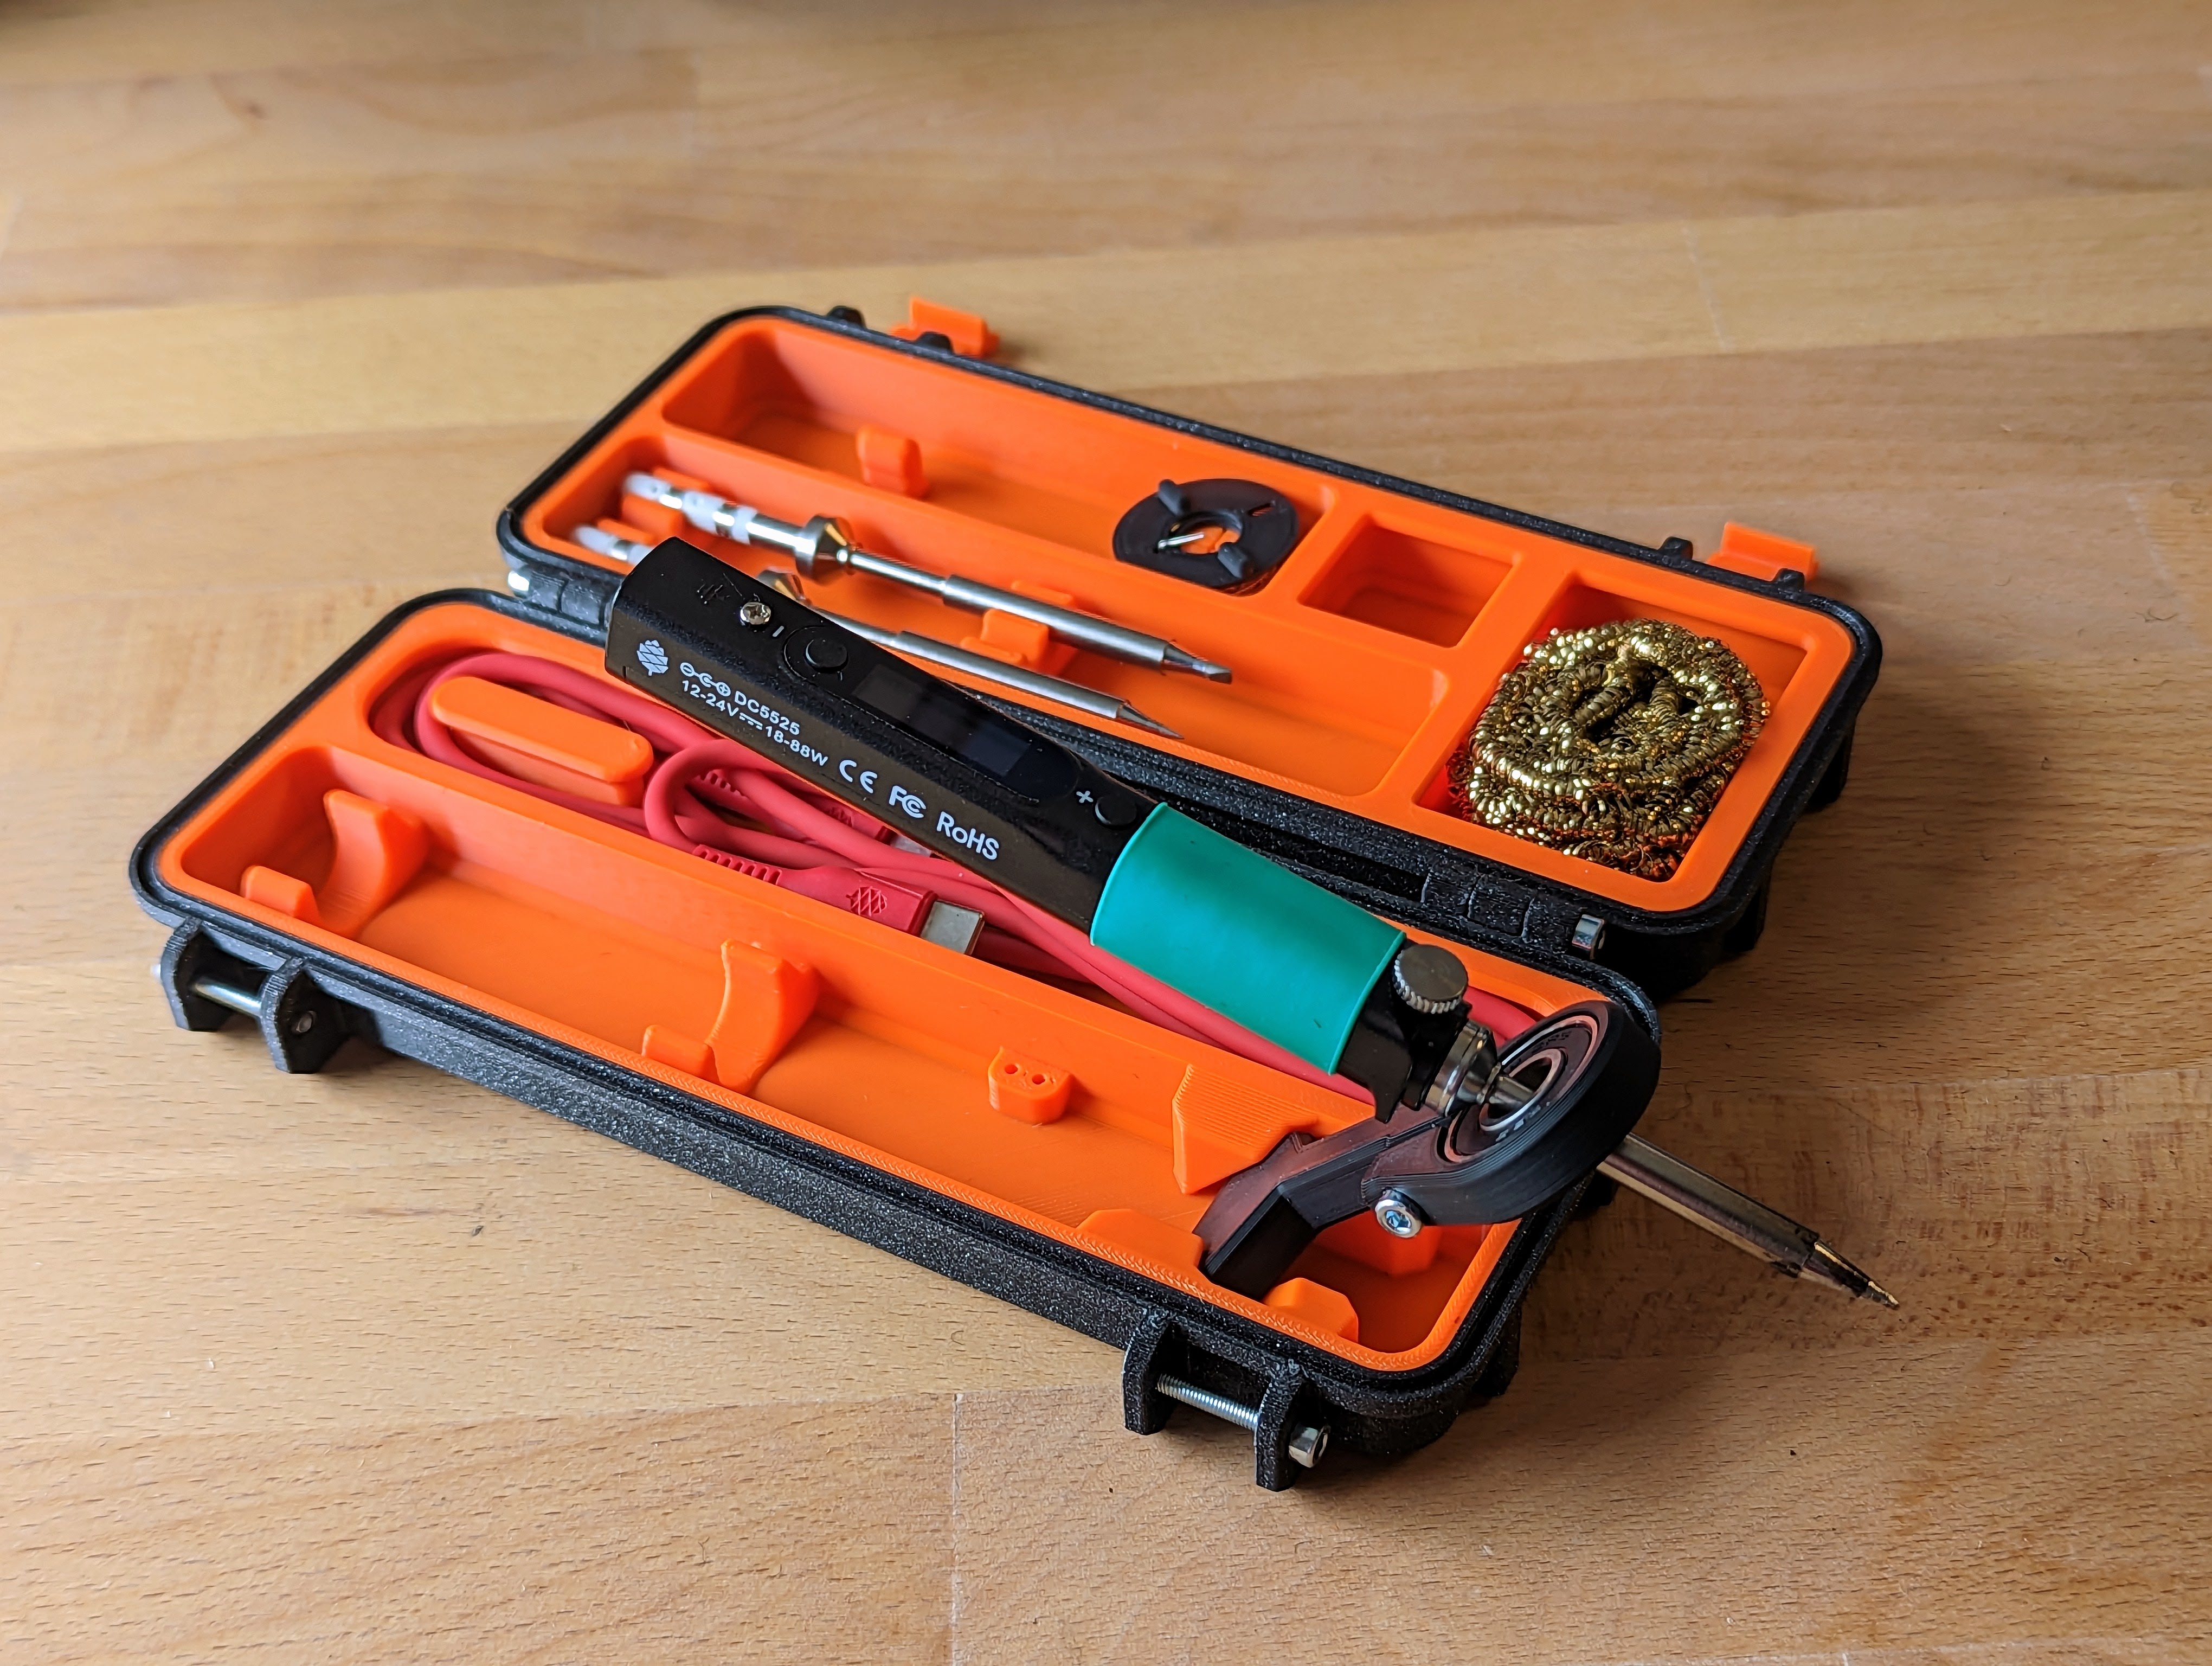 Robust case kit for the Pinecil - Everything neatly and perfectly packaged